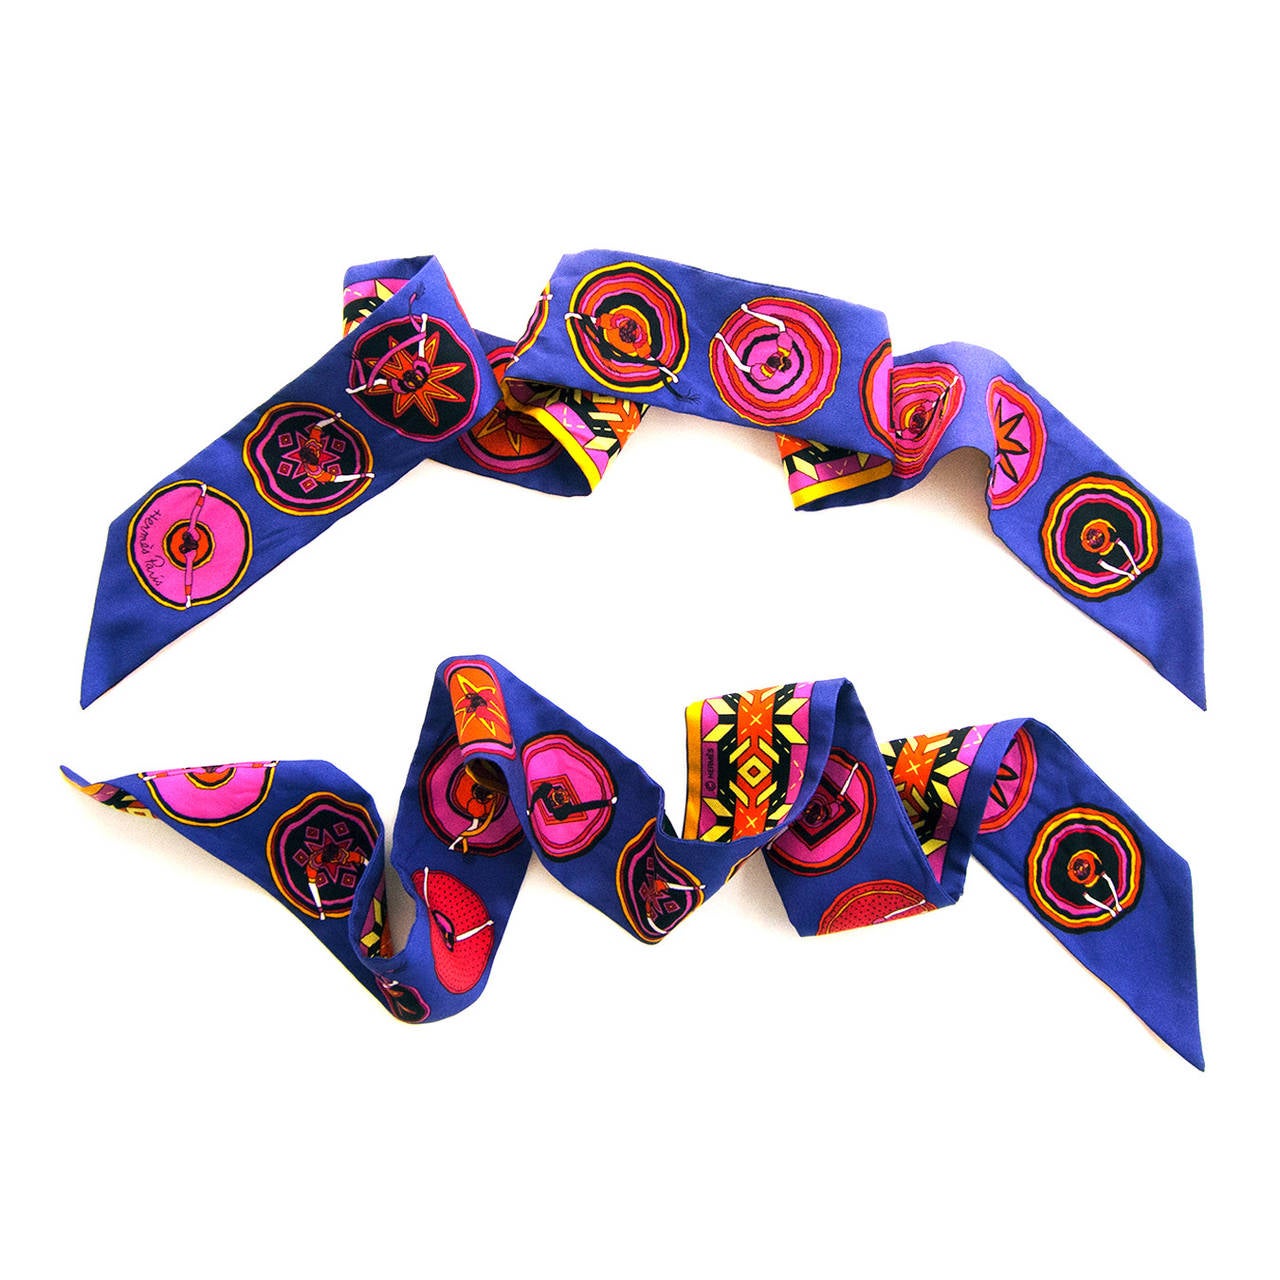 Hermes Belles du Mexique Twillies Pair Twilly Purple Pink Grail

Designed by Virginie Jamin
This comes from a painting by Jamin of Mexican dancers with their colorful skirts swirling below the parts in their hair
These gorgeous twillies are in